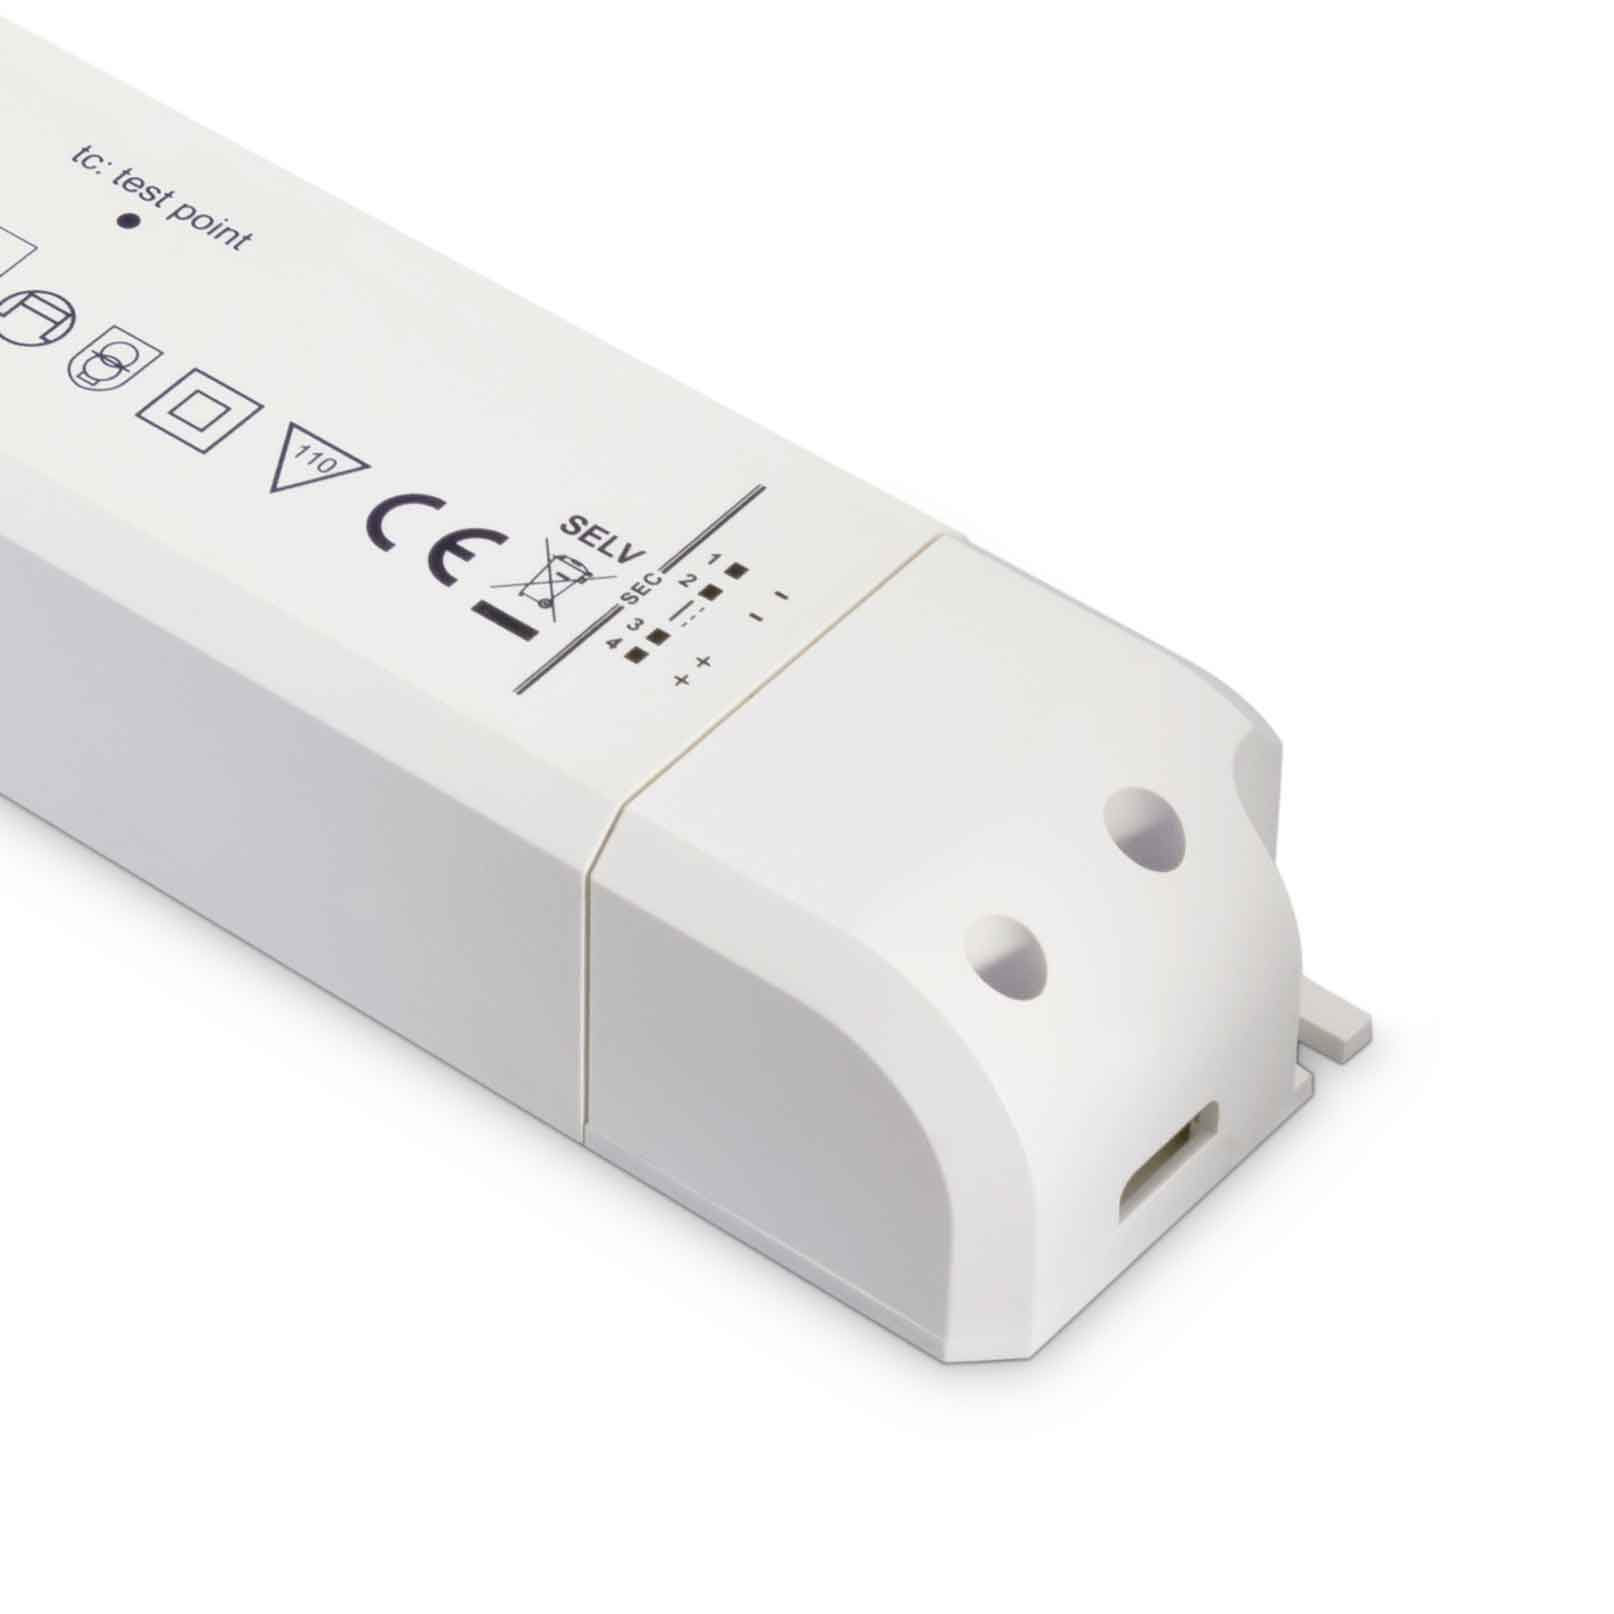 JCC BC020008 24V 30W Non-Dimmable Driver IP20